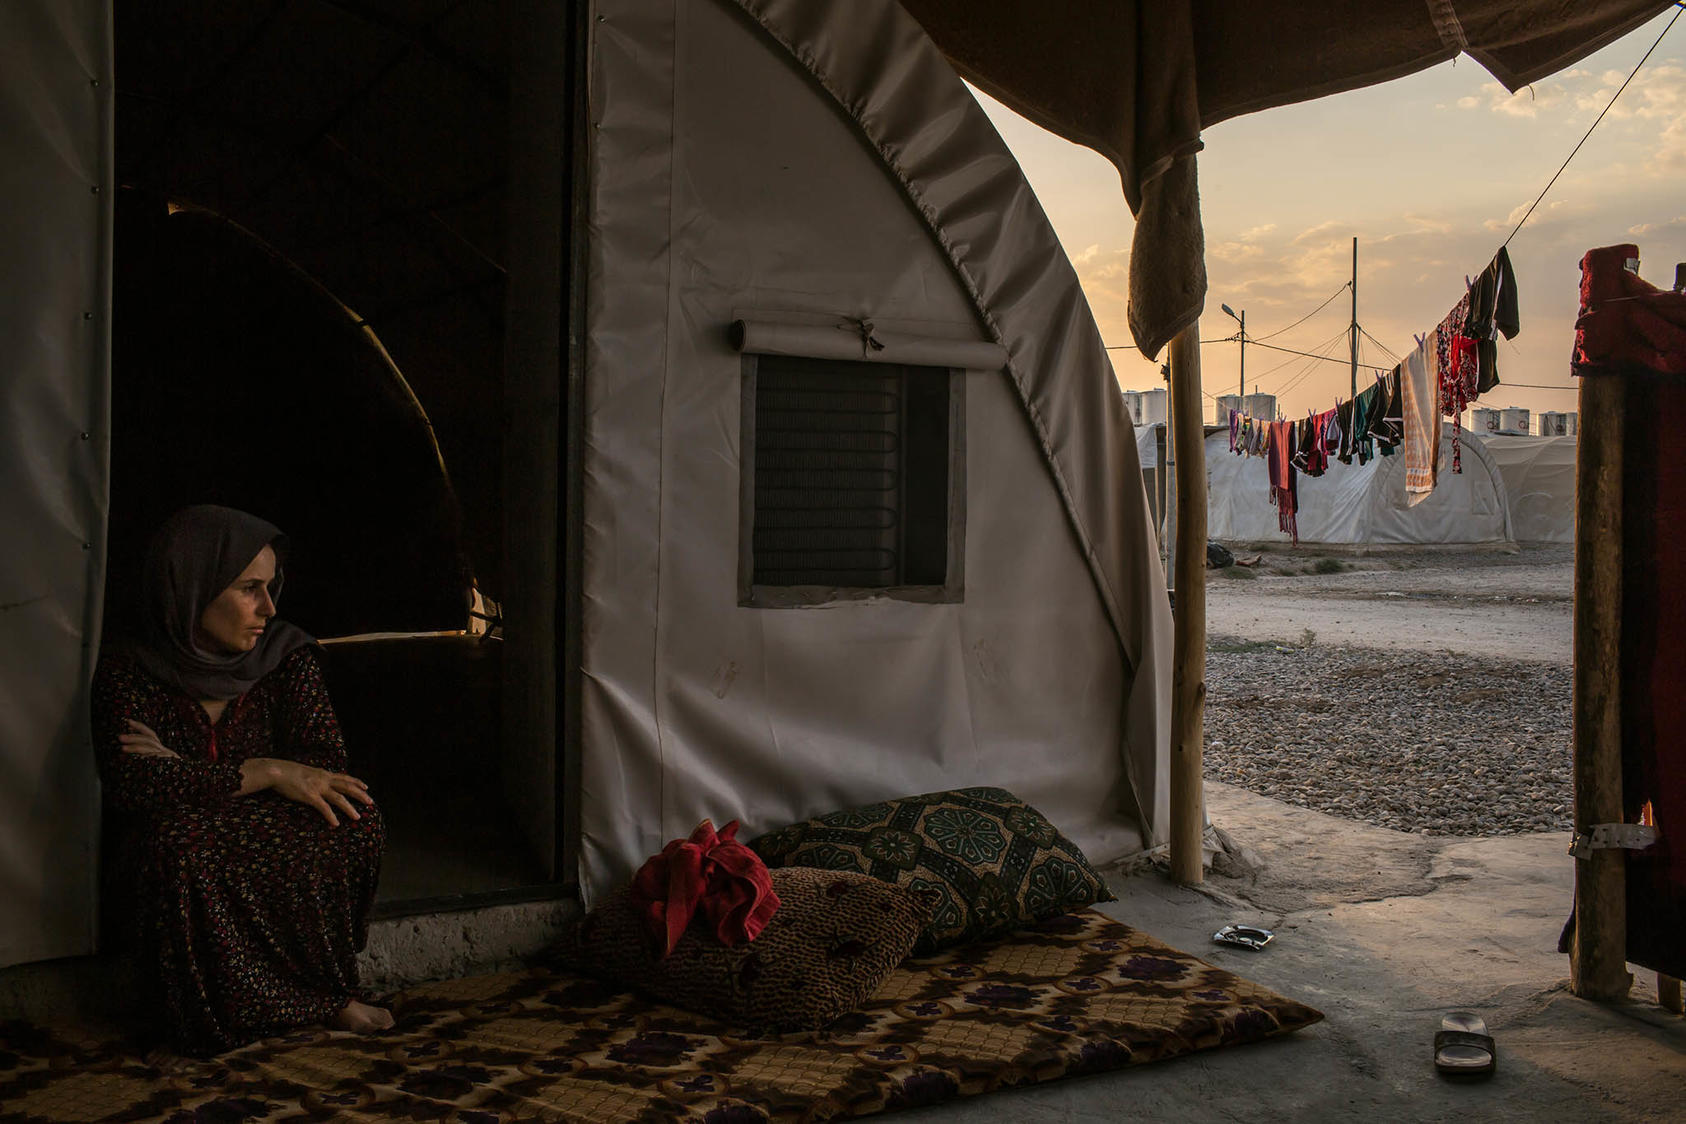 A Yazidi woman in a refugee camp outside Dohuk, Iraq. July 24, 2015. Many Yazidi women were subjected to sexual slavery by the Islamic State. (Mauricio Lima/The New York Times)